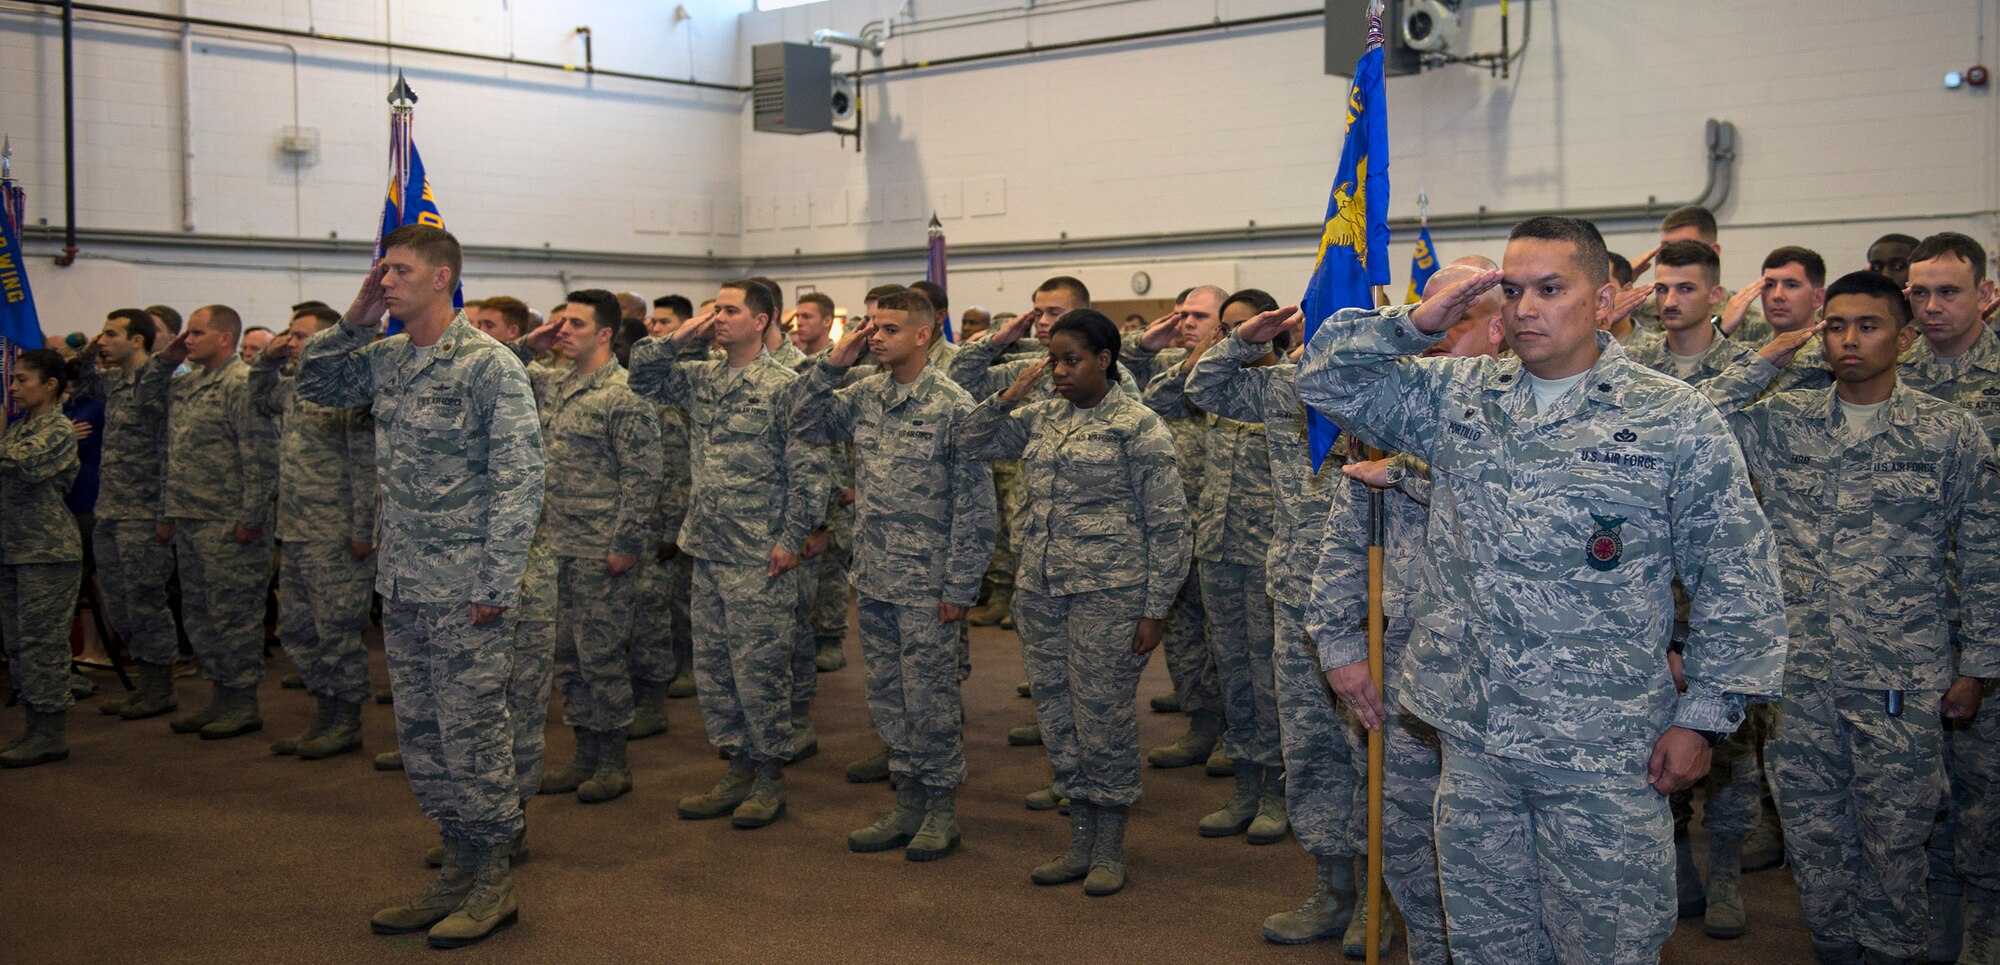 U.S. Air Force Airmen from the 23d Mission Support Group render salutes during a change of command ceremony, June 21, 2016, at Moody Air Force Base, Ga. The 23d MSG recognized the formal transfer of authority and responsibility for their unit as Col. Norman Dozier relinquished command to Col. Susan Riordan-Smith. (U.S. Air Force photo by Airman 1st Class Greg Nash/Released) 